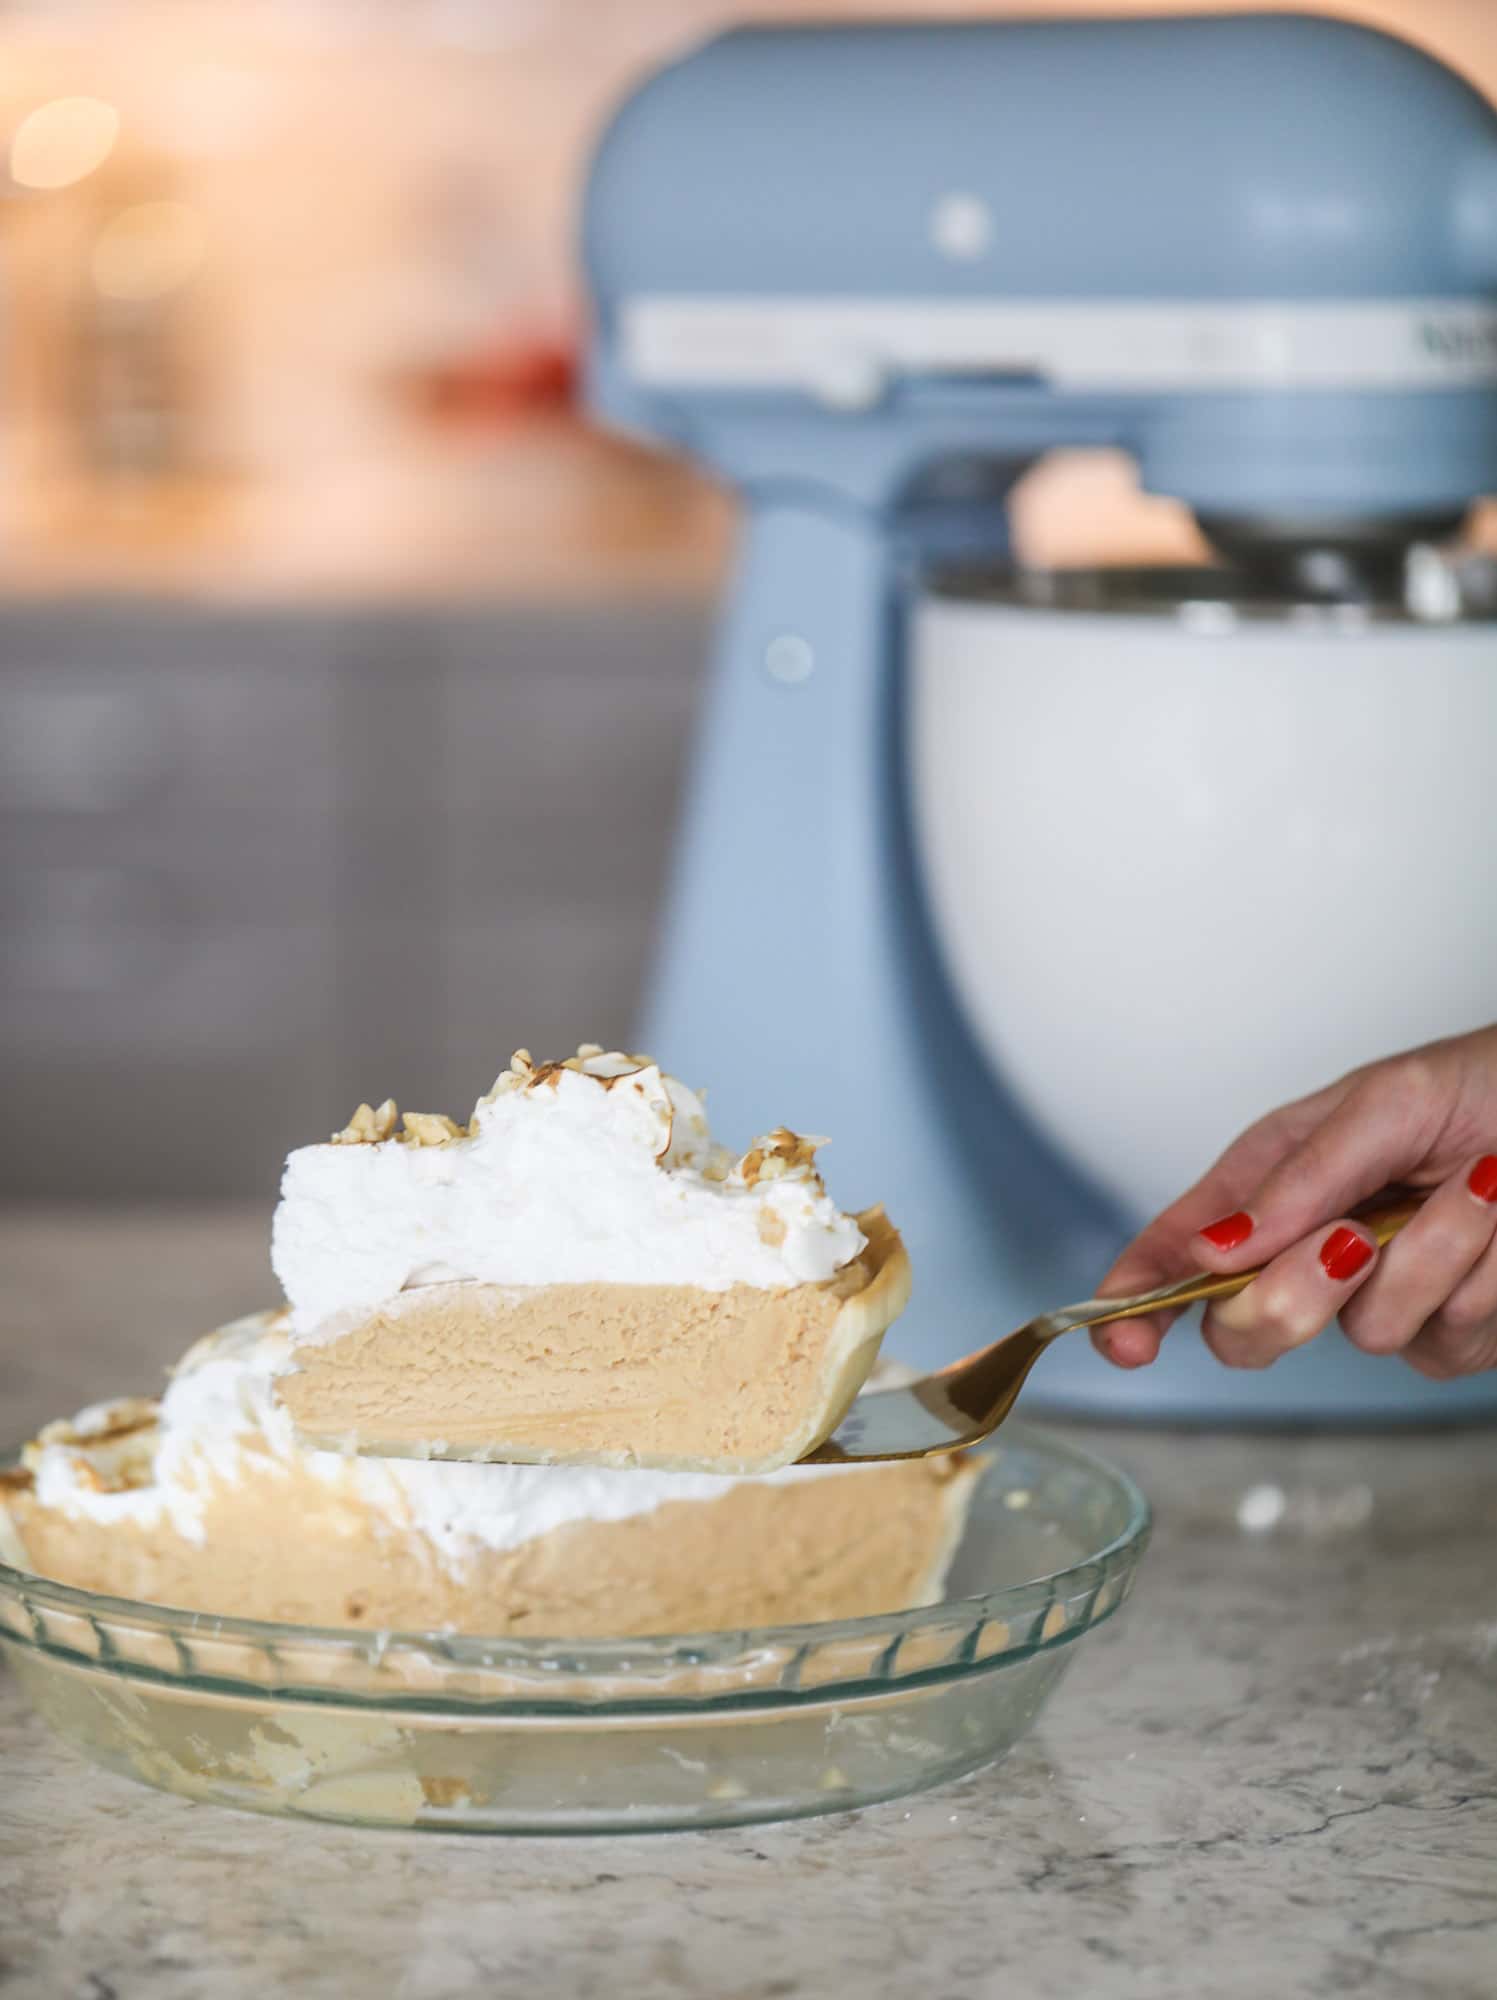 Celebrating 100 years of kitchenaid with mother lovett’s peanut butter pie!